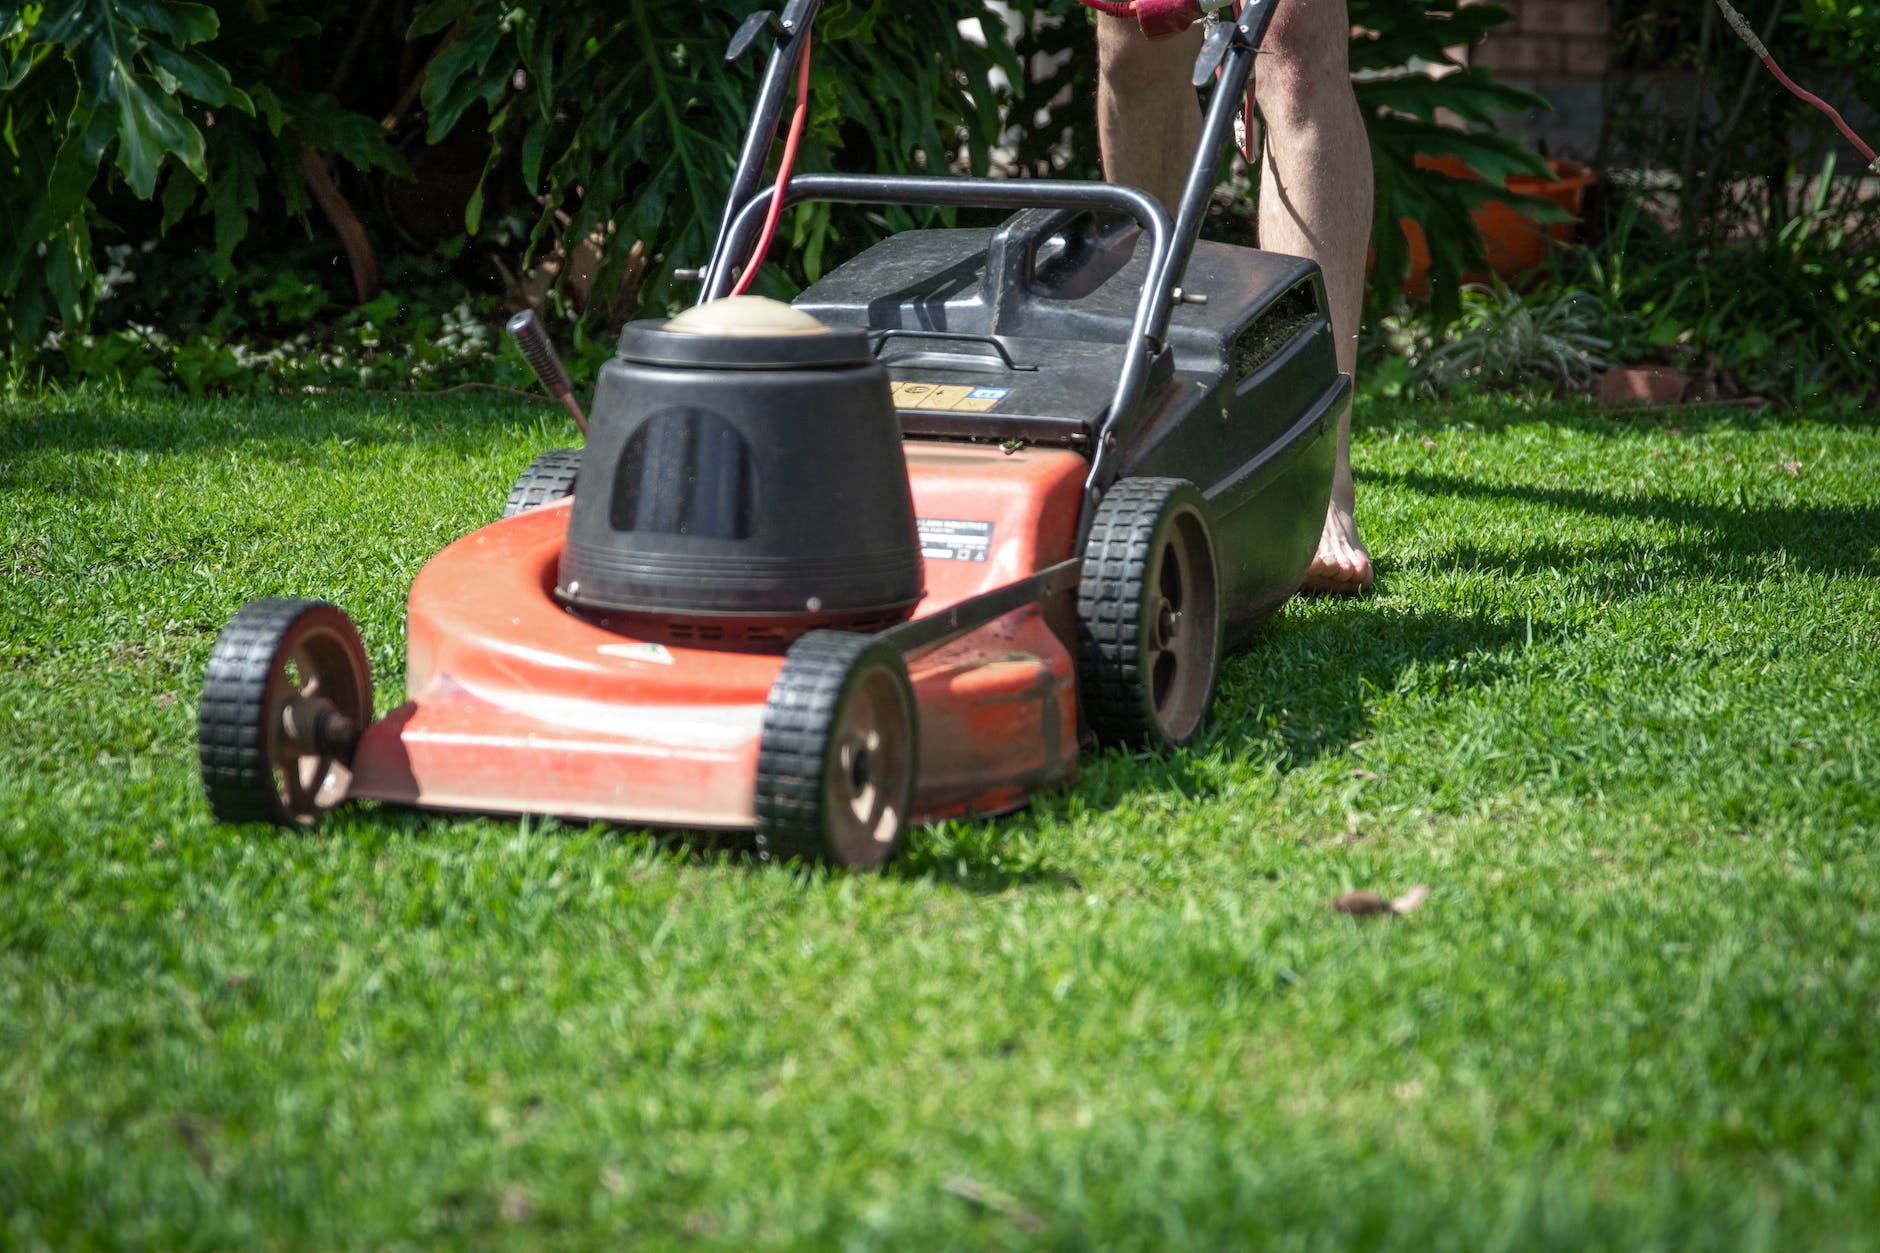 Remote Controlled Lawn Mowers